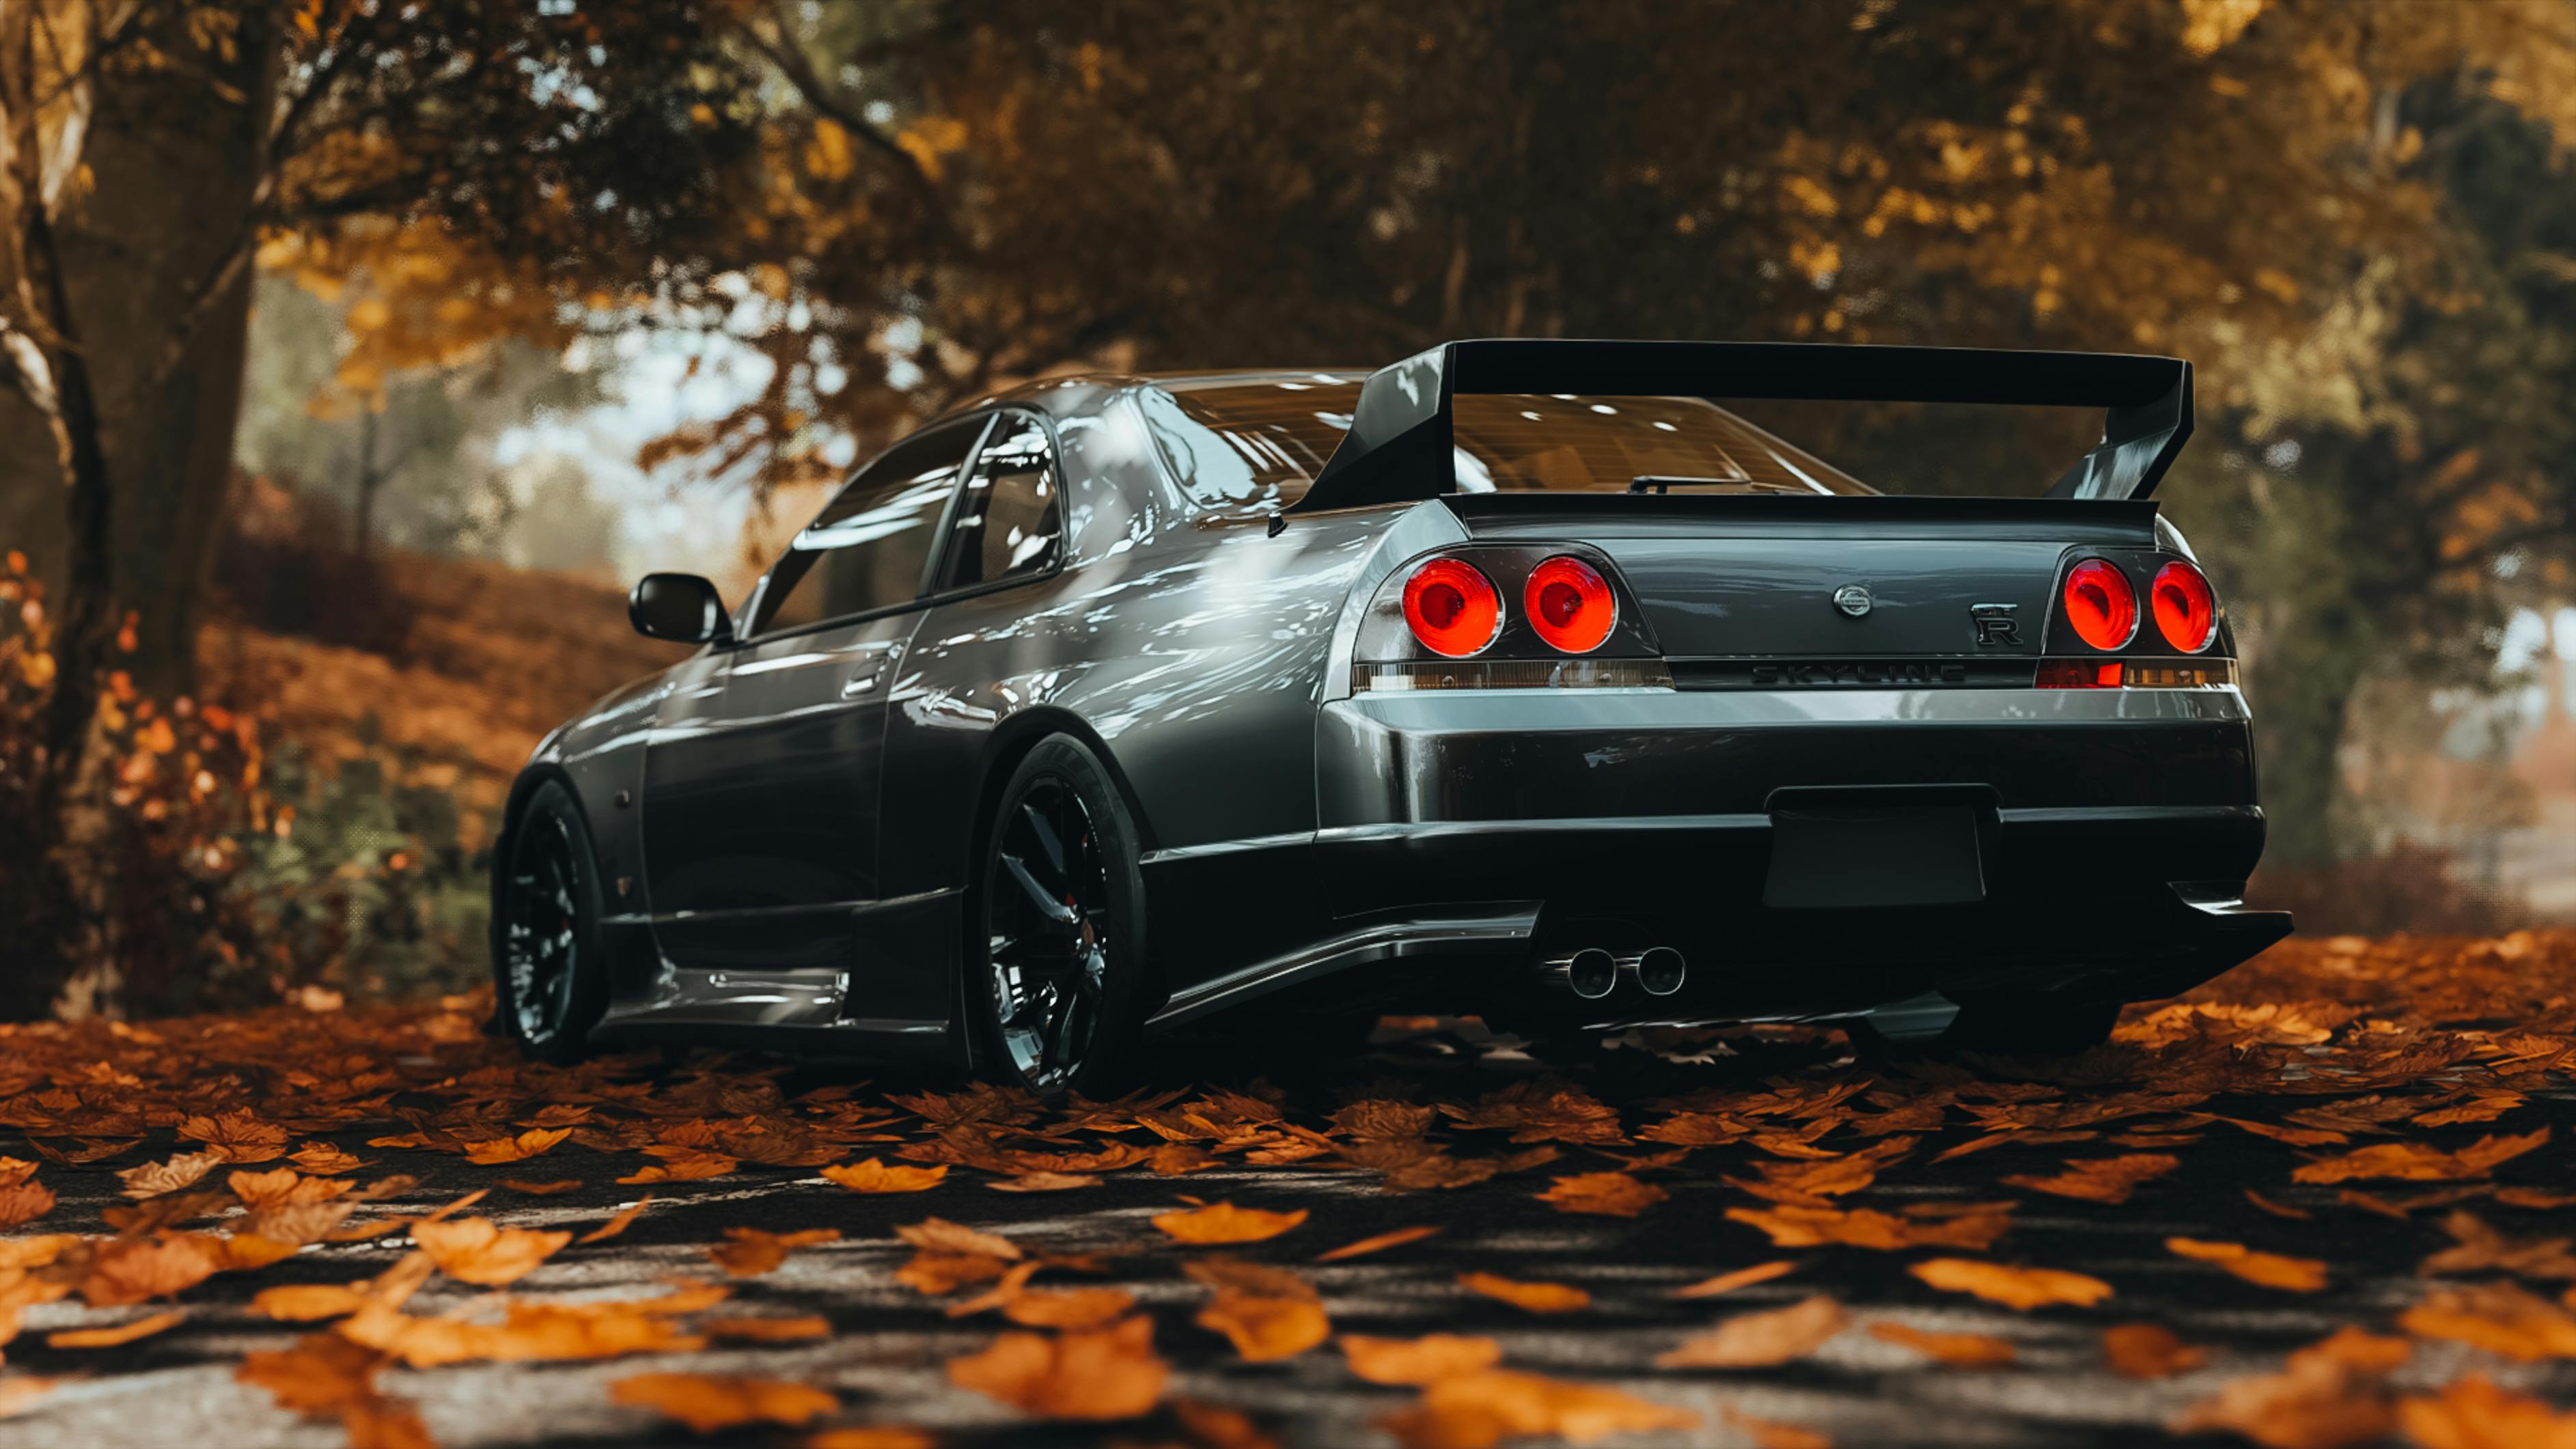 Jdm Photos, Download The BEST Free Jdm Stock Photos & HD Images